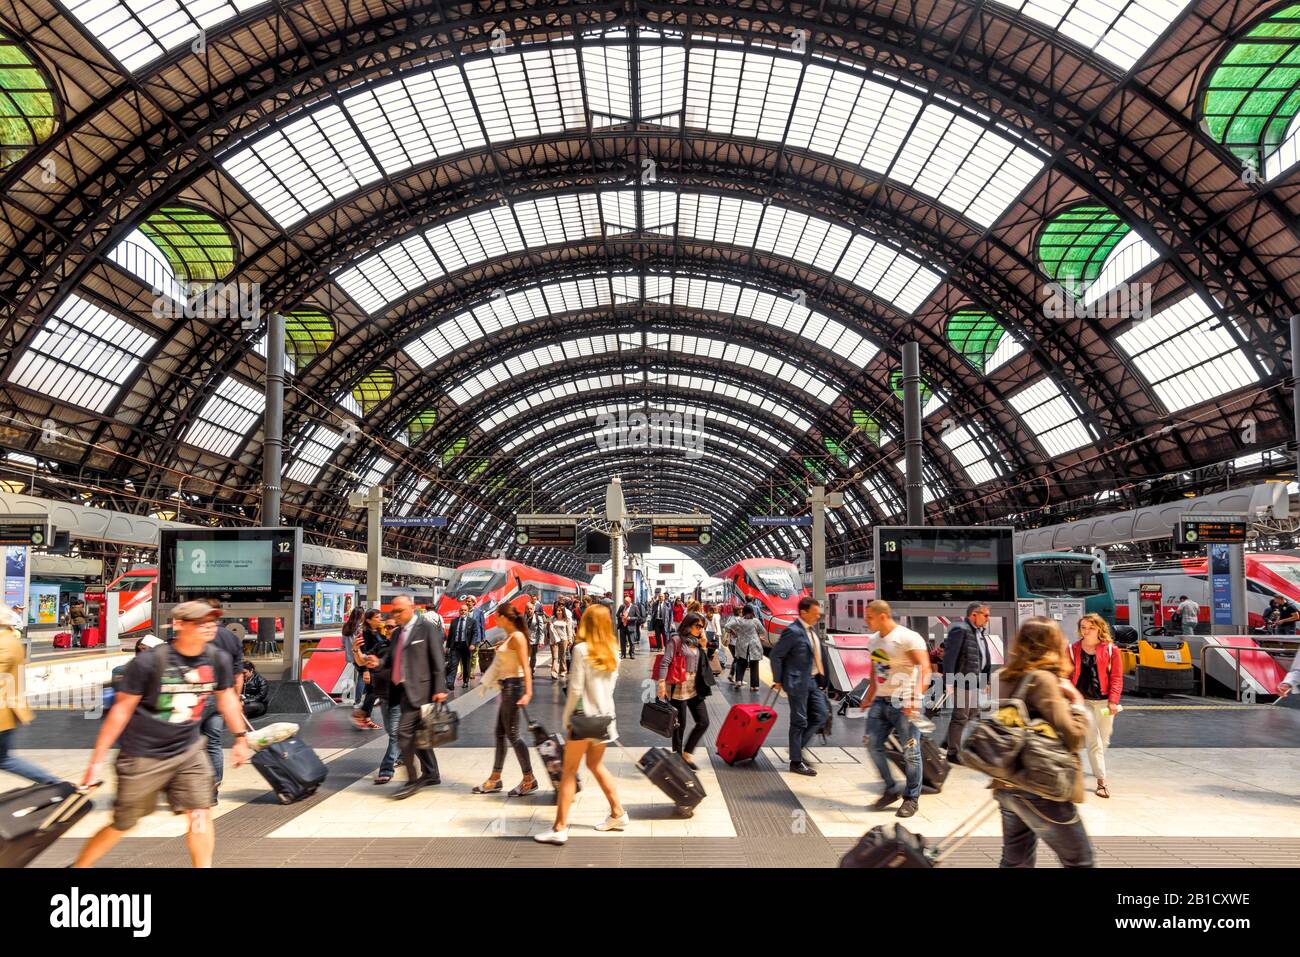 Milan, Italy - May 17, 2017: People visit the Milan Central Station with high-speed trains. Crowds of tourists at the Milan railway station. Concept o Stock Photo